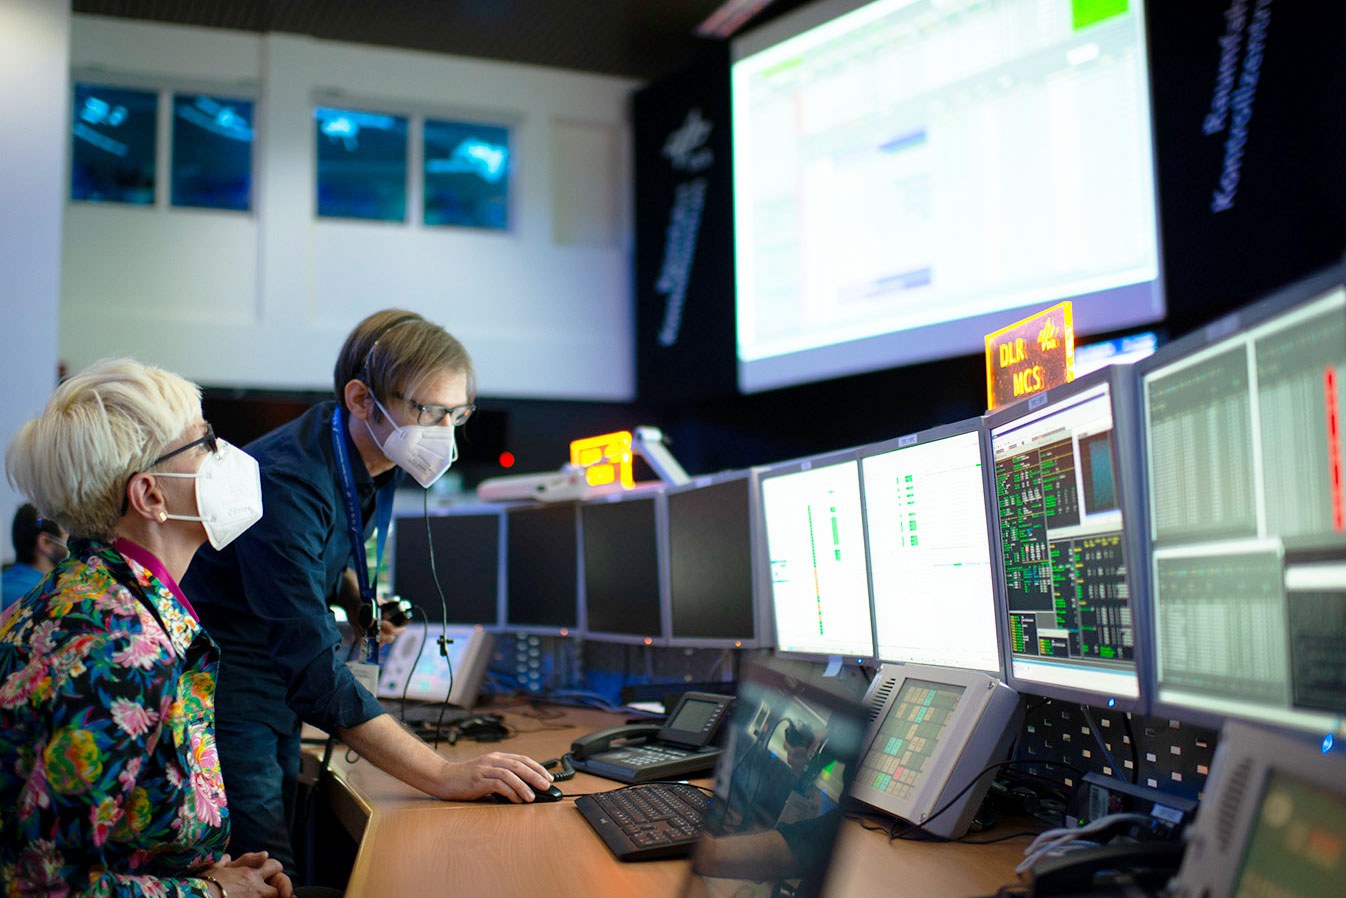 DLR Executive Board Chair Anke Kaysser-Pyzalla in the control room during the commanding test